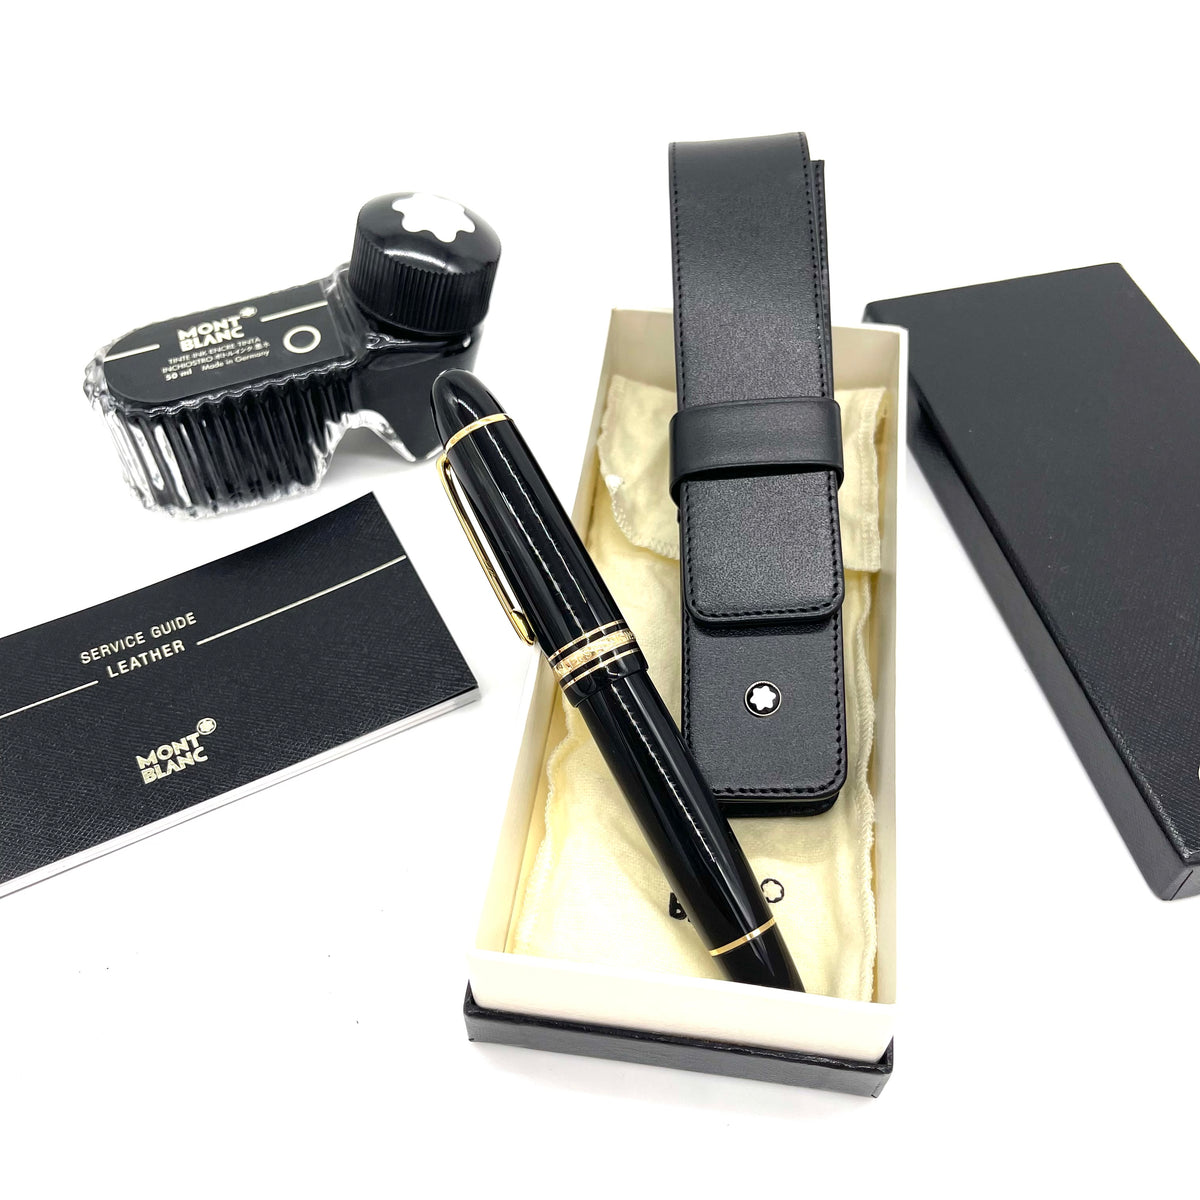 Montblanc Meisterstuck Fountain Pen 149 Black Gold Trim with Montblanc Bottled Ink